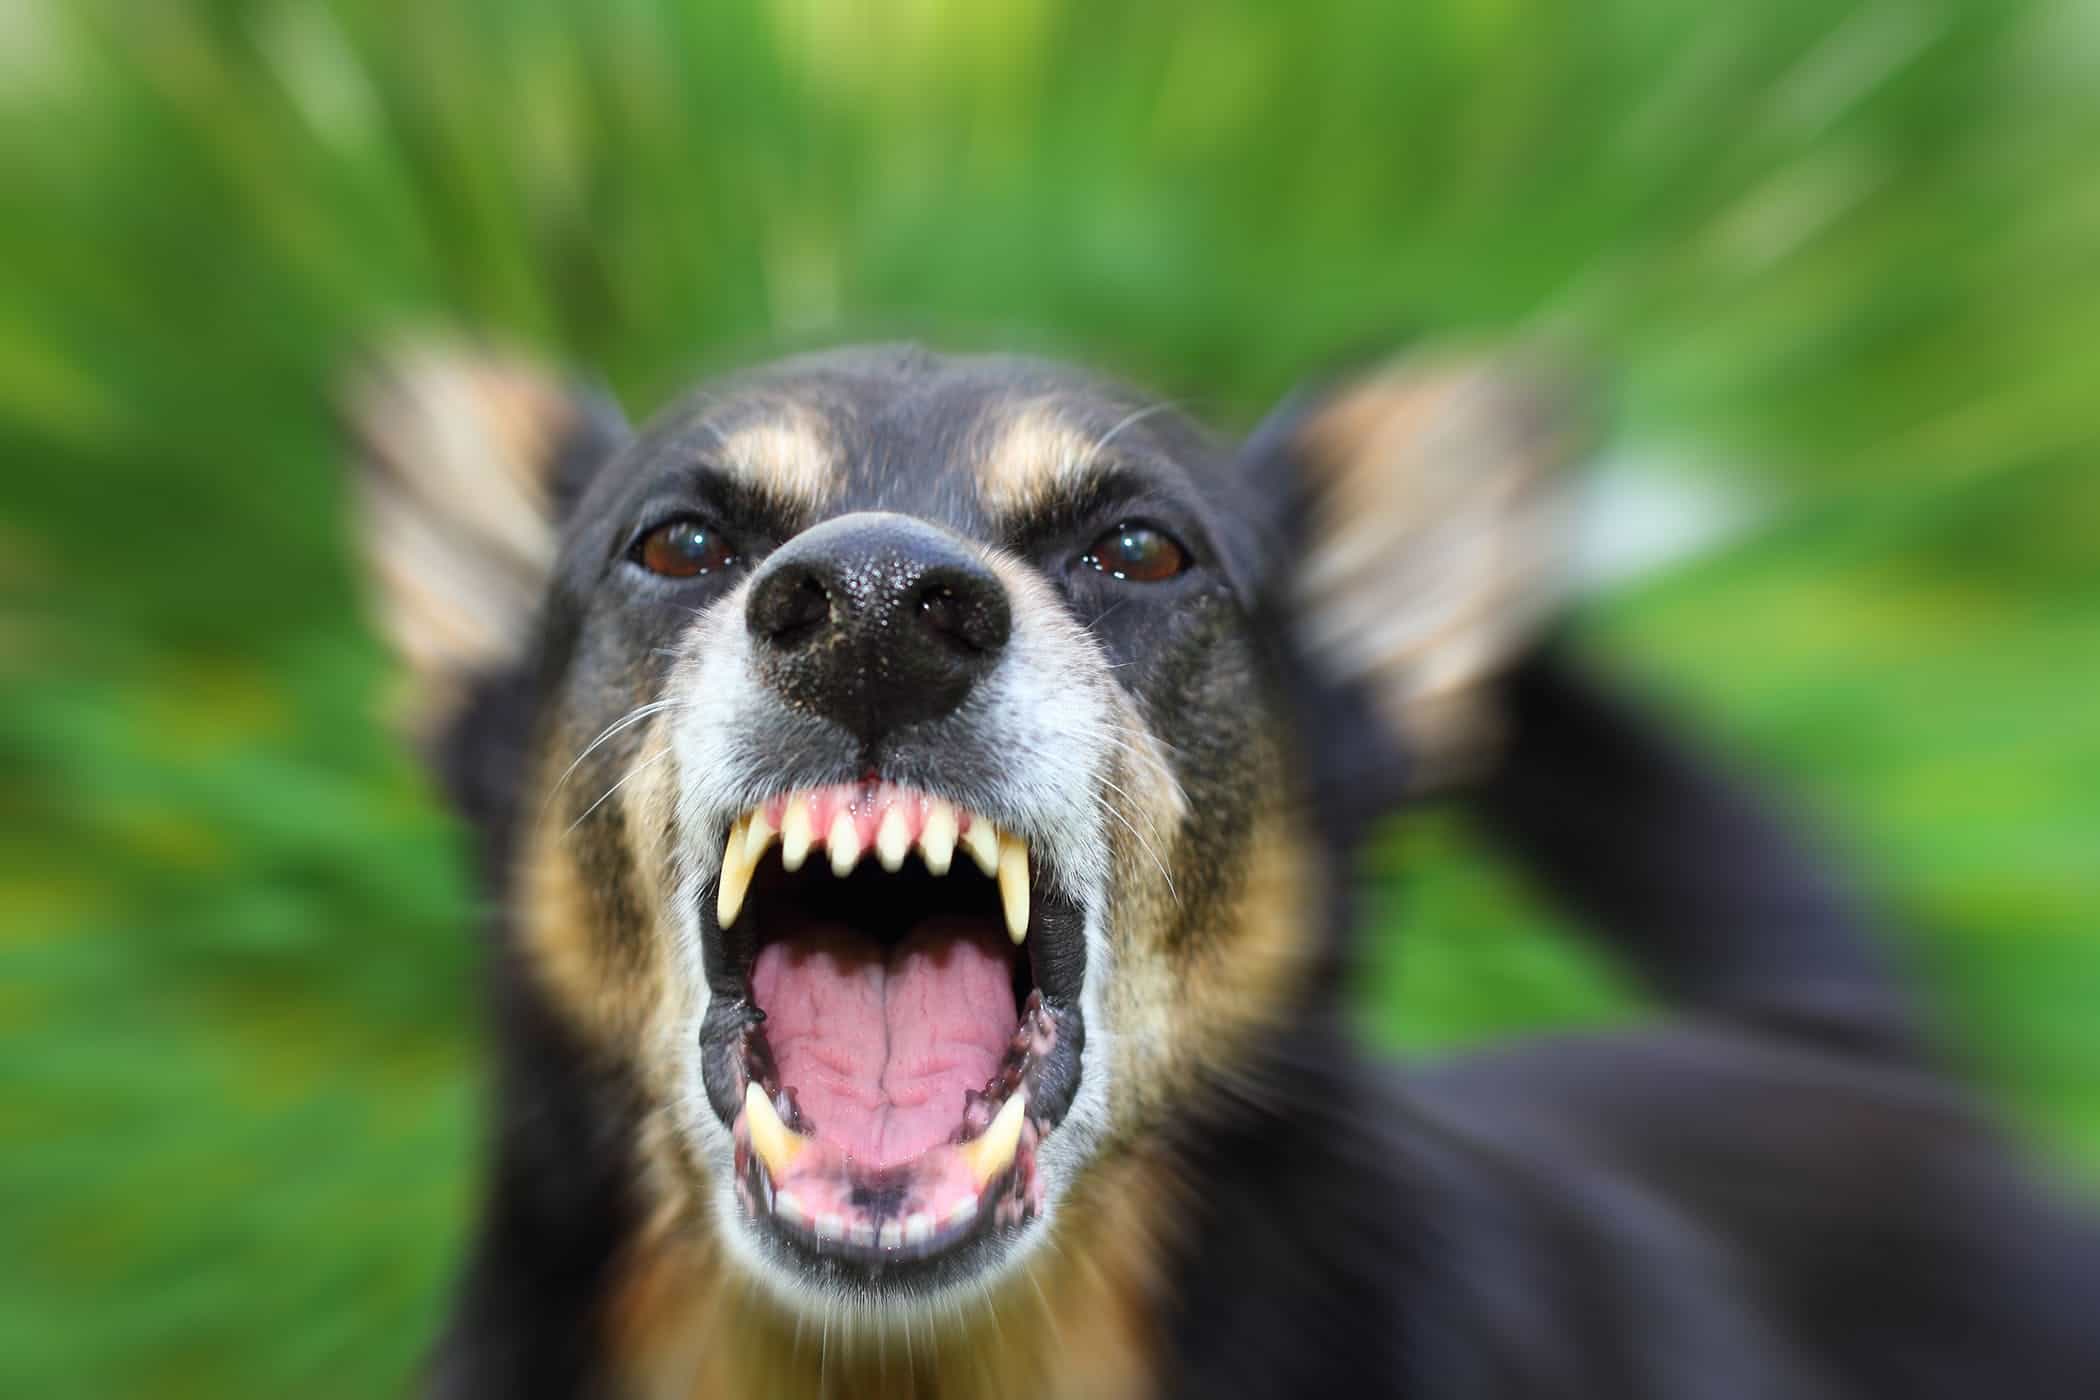 The rabies vaccination reduces the risk of their dog contracting the often fatal disease.